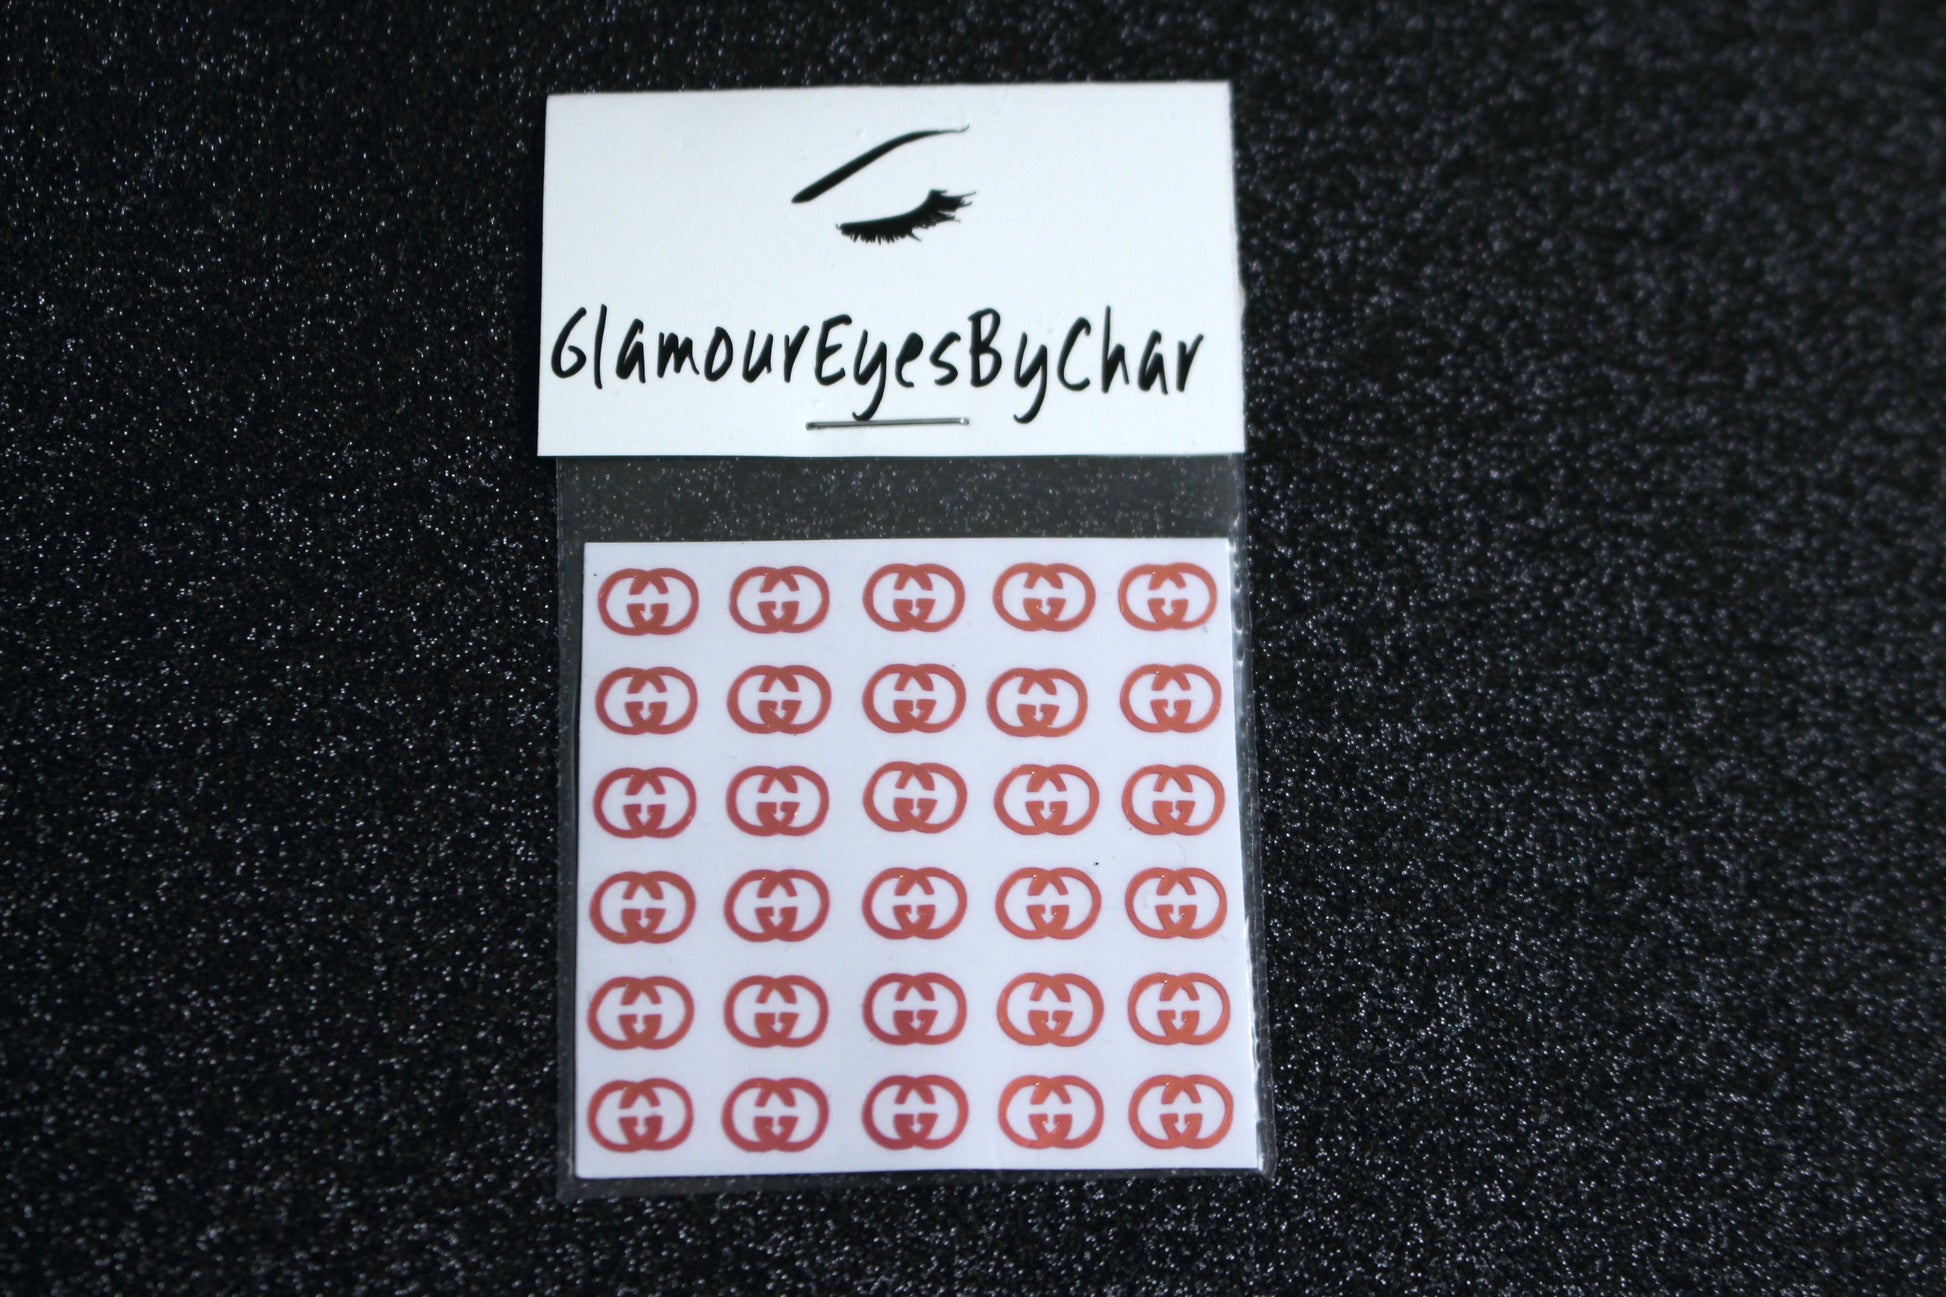 Spice up your nails with these unique GG designer inspired nail decals. They can be used on natural or acrylic nails. You can also apply them on top of regular or gel/shellac nail polish. These handmade decals can also be used for body art or any DIY project. The pack contains 30 decals and is available in 4 different colours.   Size: ﻿W= 0.3 inches, H= 0.22 inches  Tip: Apply some of our glitter on your nails to really GLAMOUREYES your look.